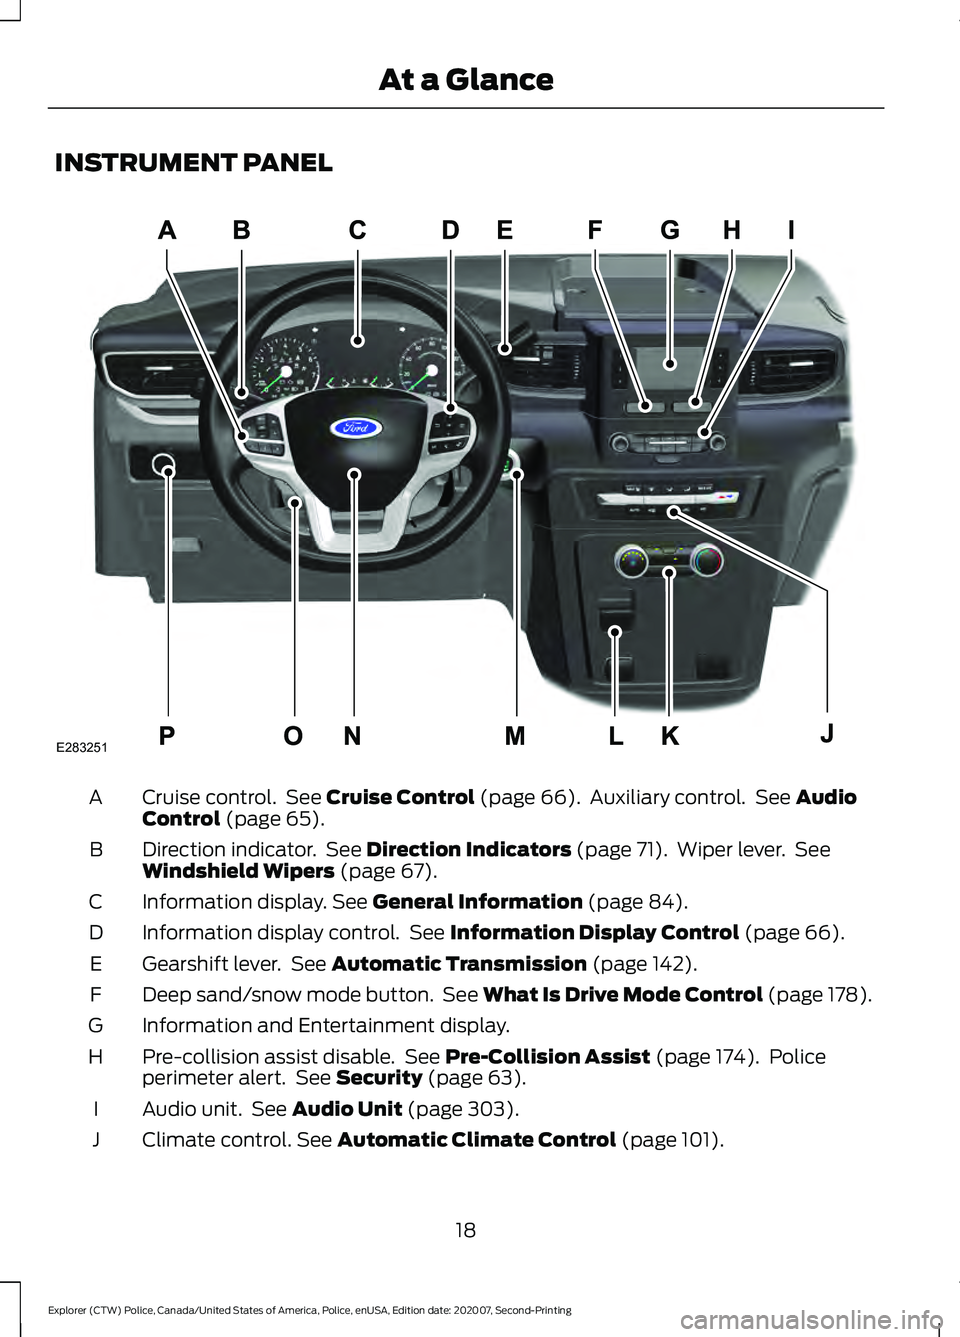 FORD POLICE INTERCEPTOR 2021 Owners Manual INSTRUMENT PANEL
Cruise control.  See Cruise Control (page 66).  Auxiliary control.  See Audio
Control (page 65).
A
Direction indicator.  See 
Direction Indicators (page 71).  Wiper lever.  See
Windsh